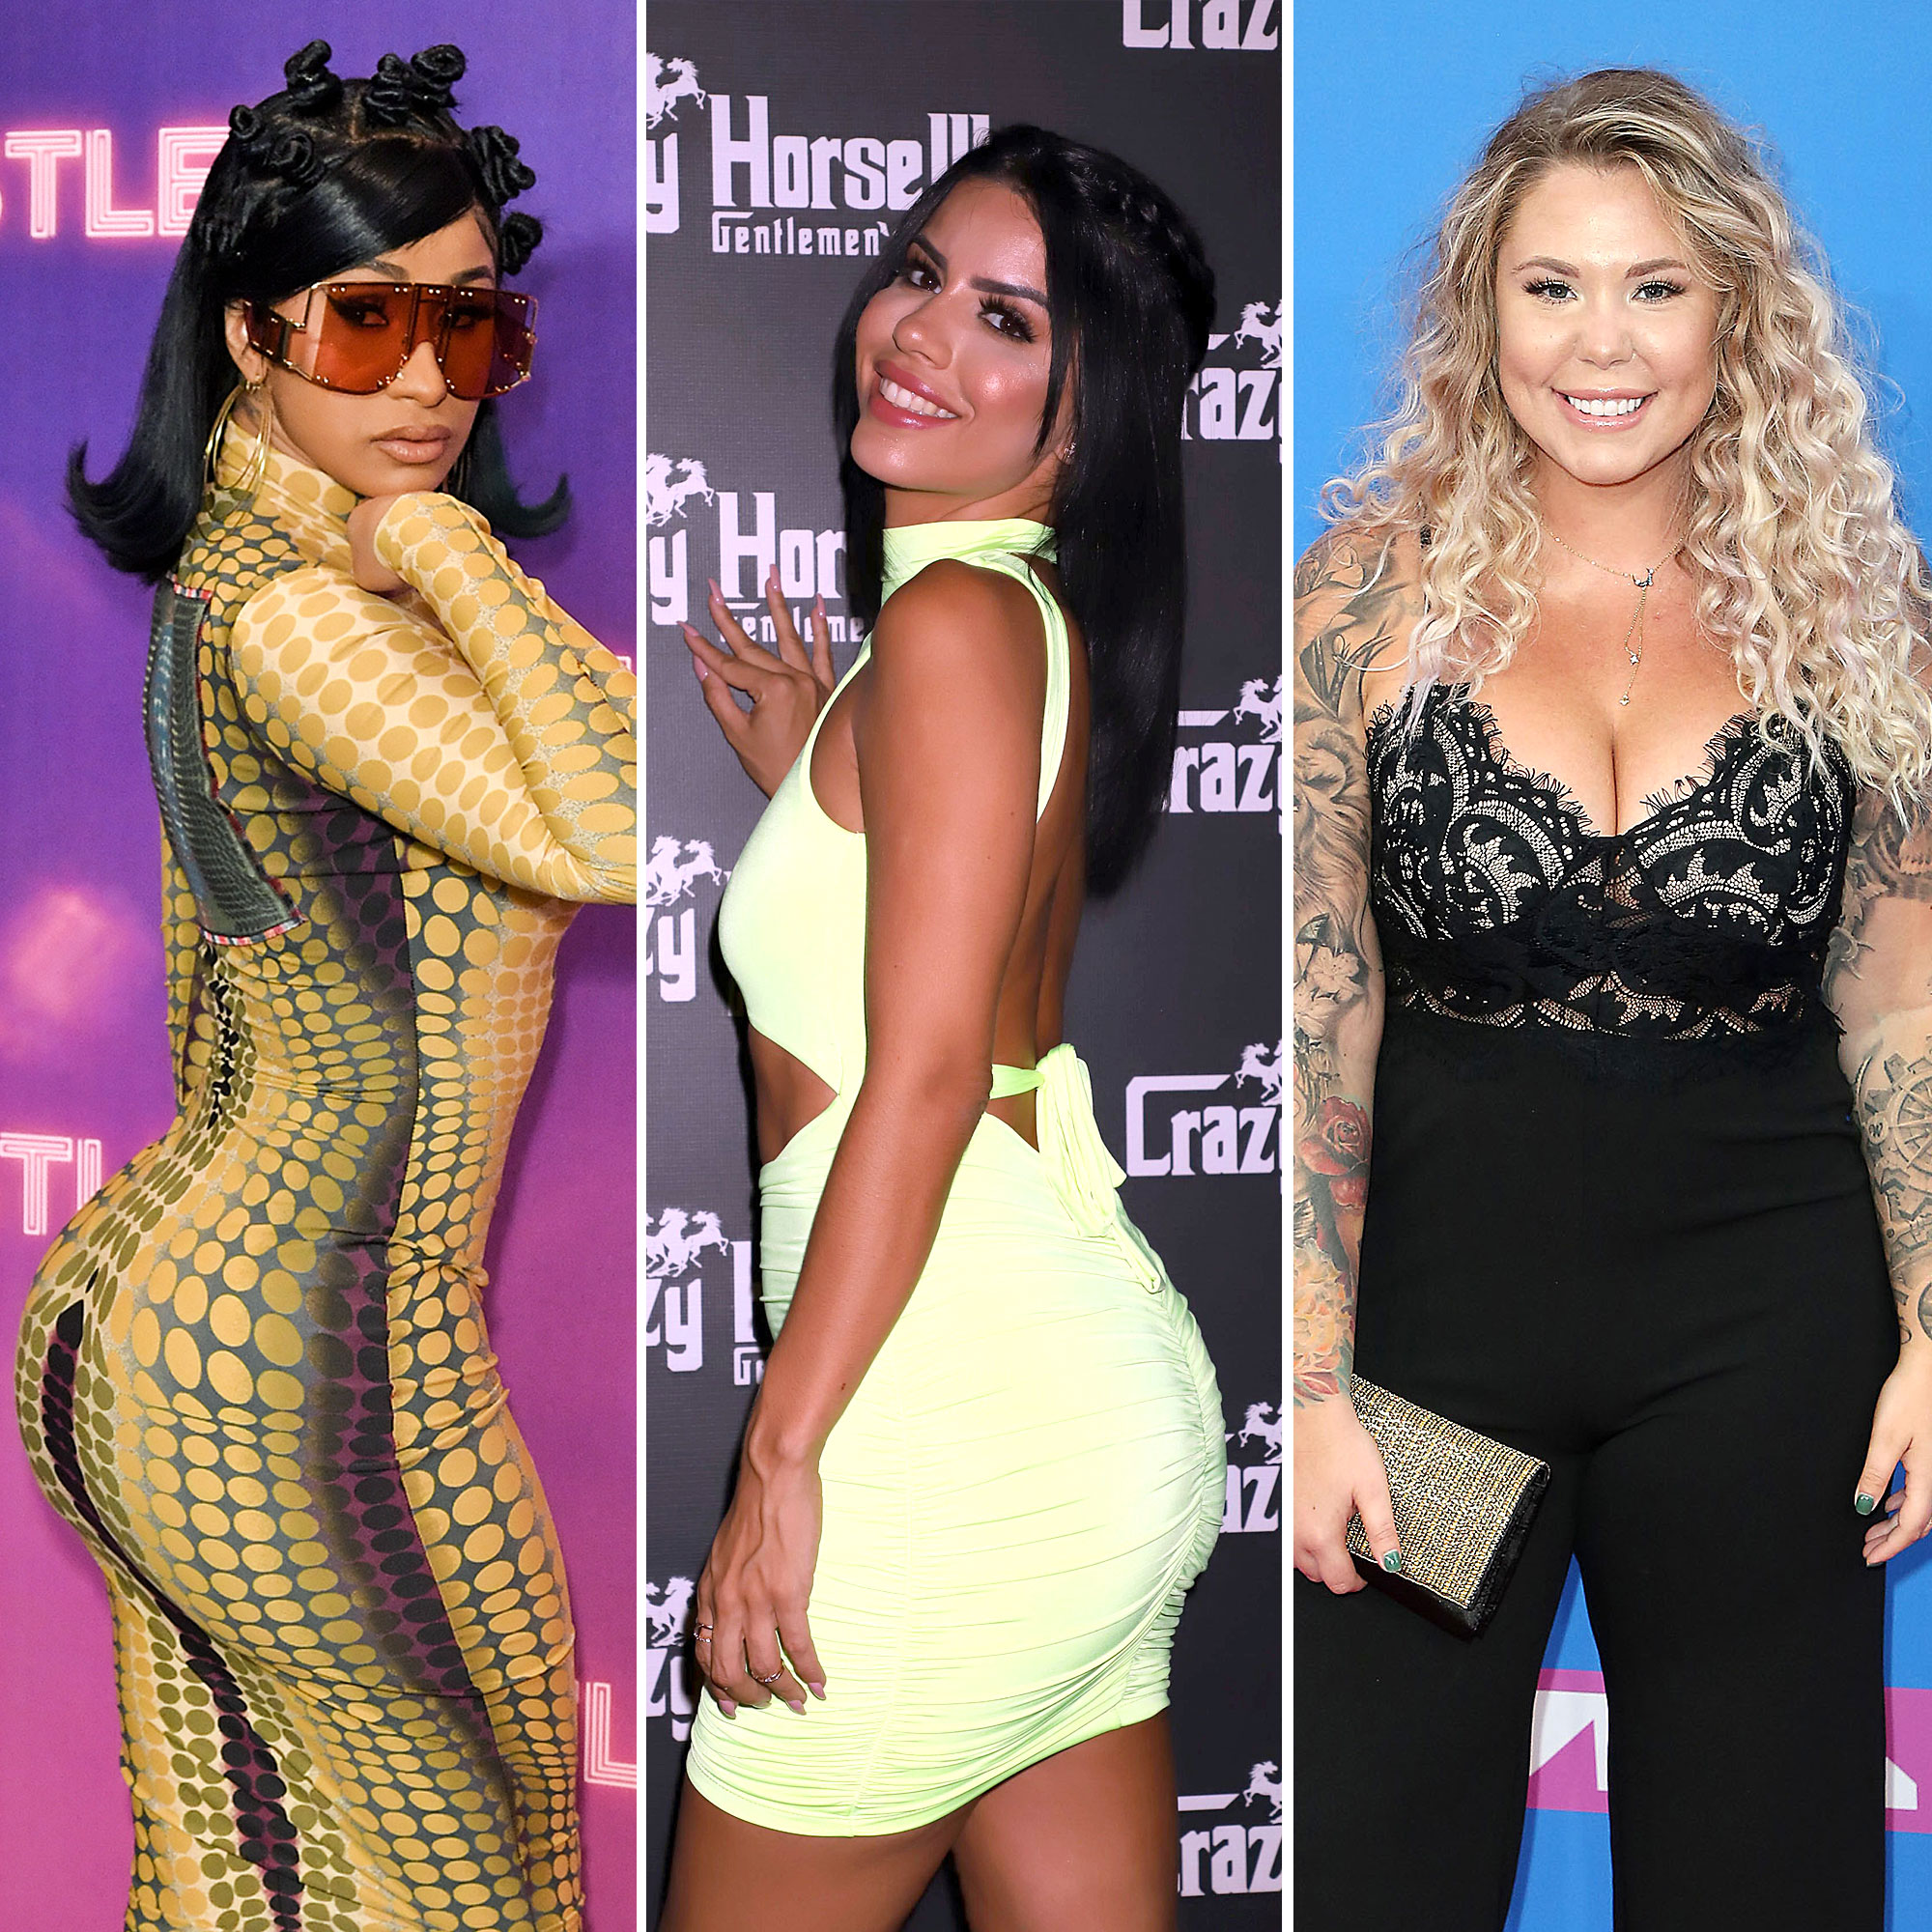 Butt Injections Porn Stars - Celebs Who Admitted to Getting Butt Enhancements, Injections